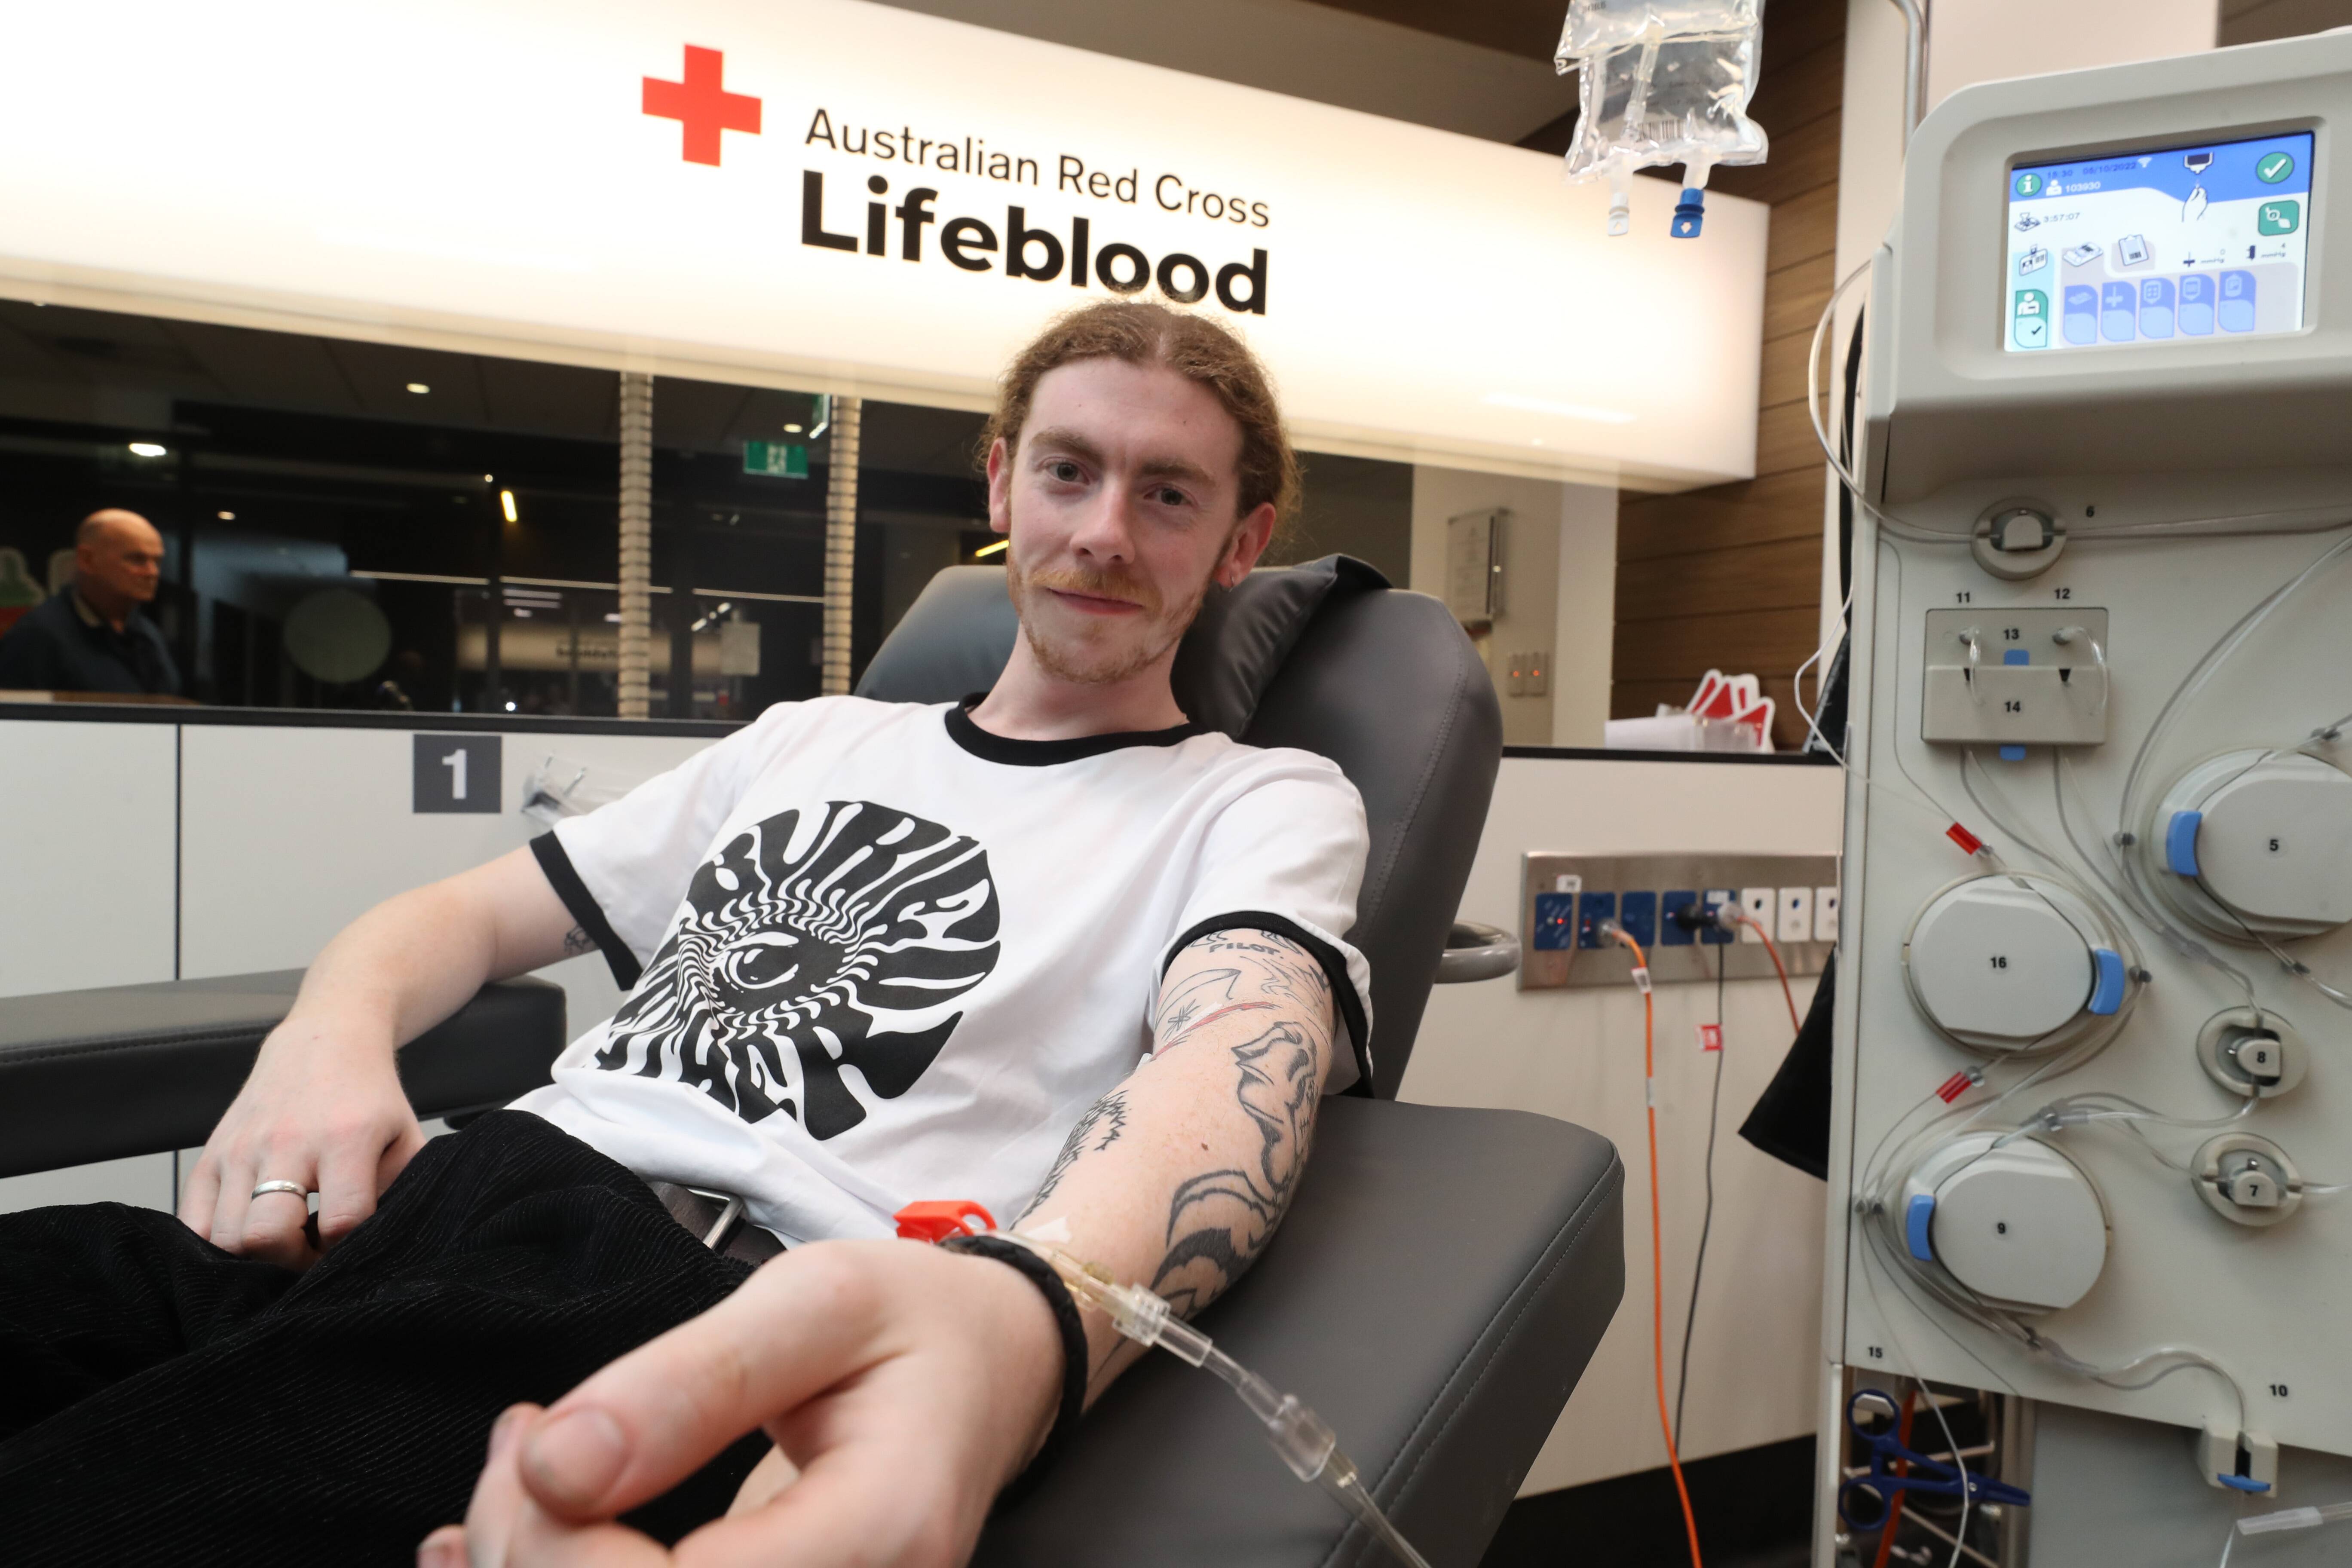 Tattoos no barrier as Red Cross pleads for thousands of plasma donors